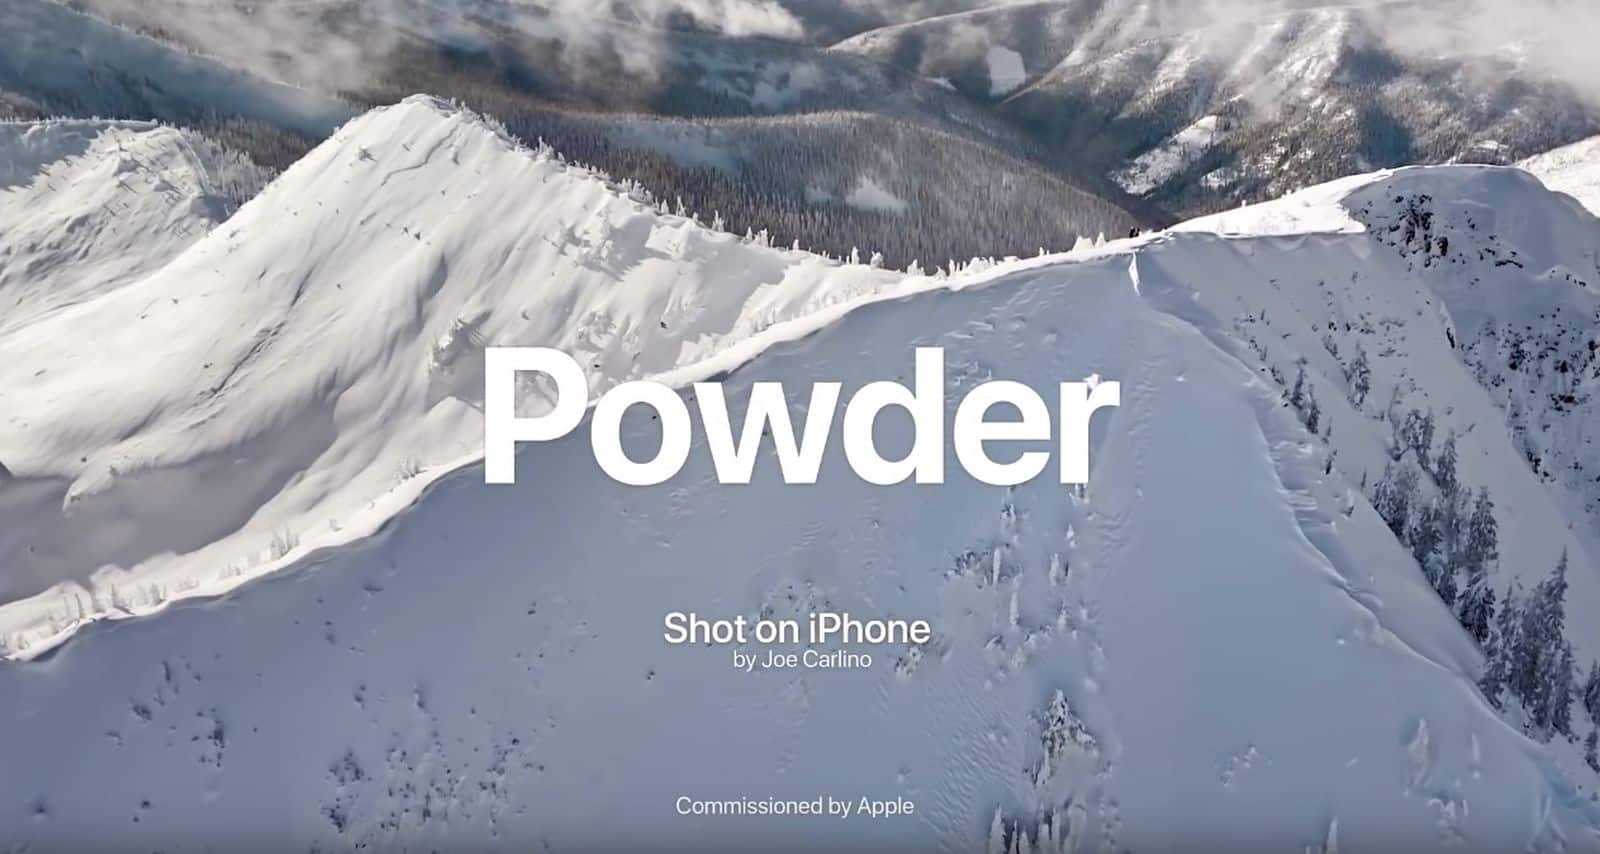 New Shot on iPhone video 'Powder' now available